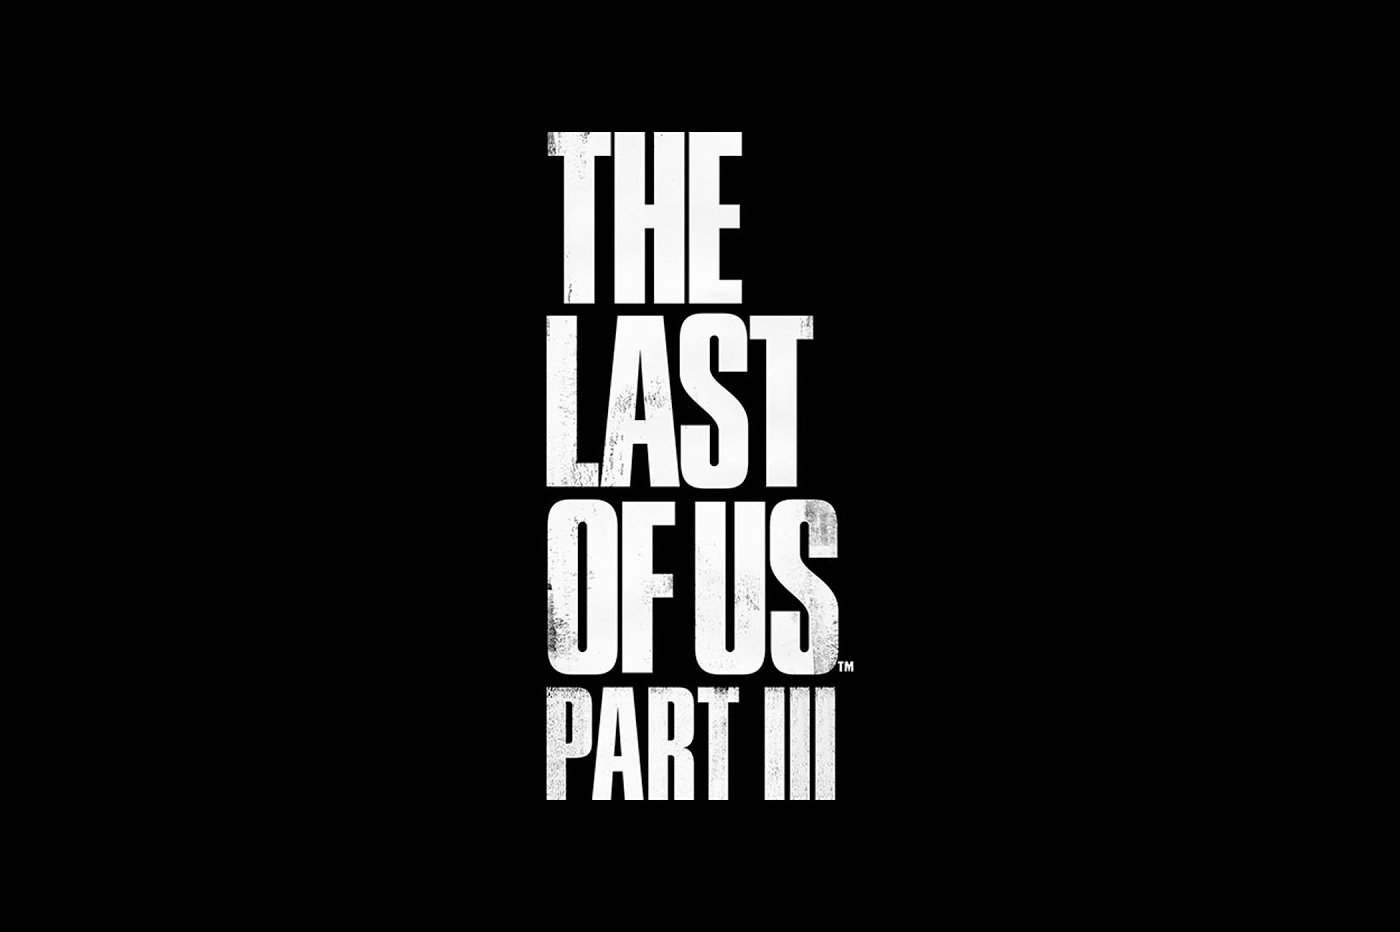 The Last of Us part 3